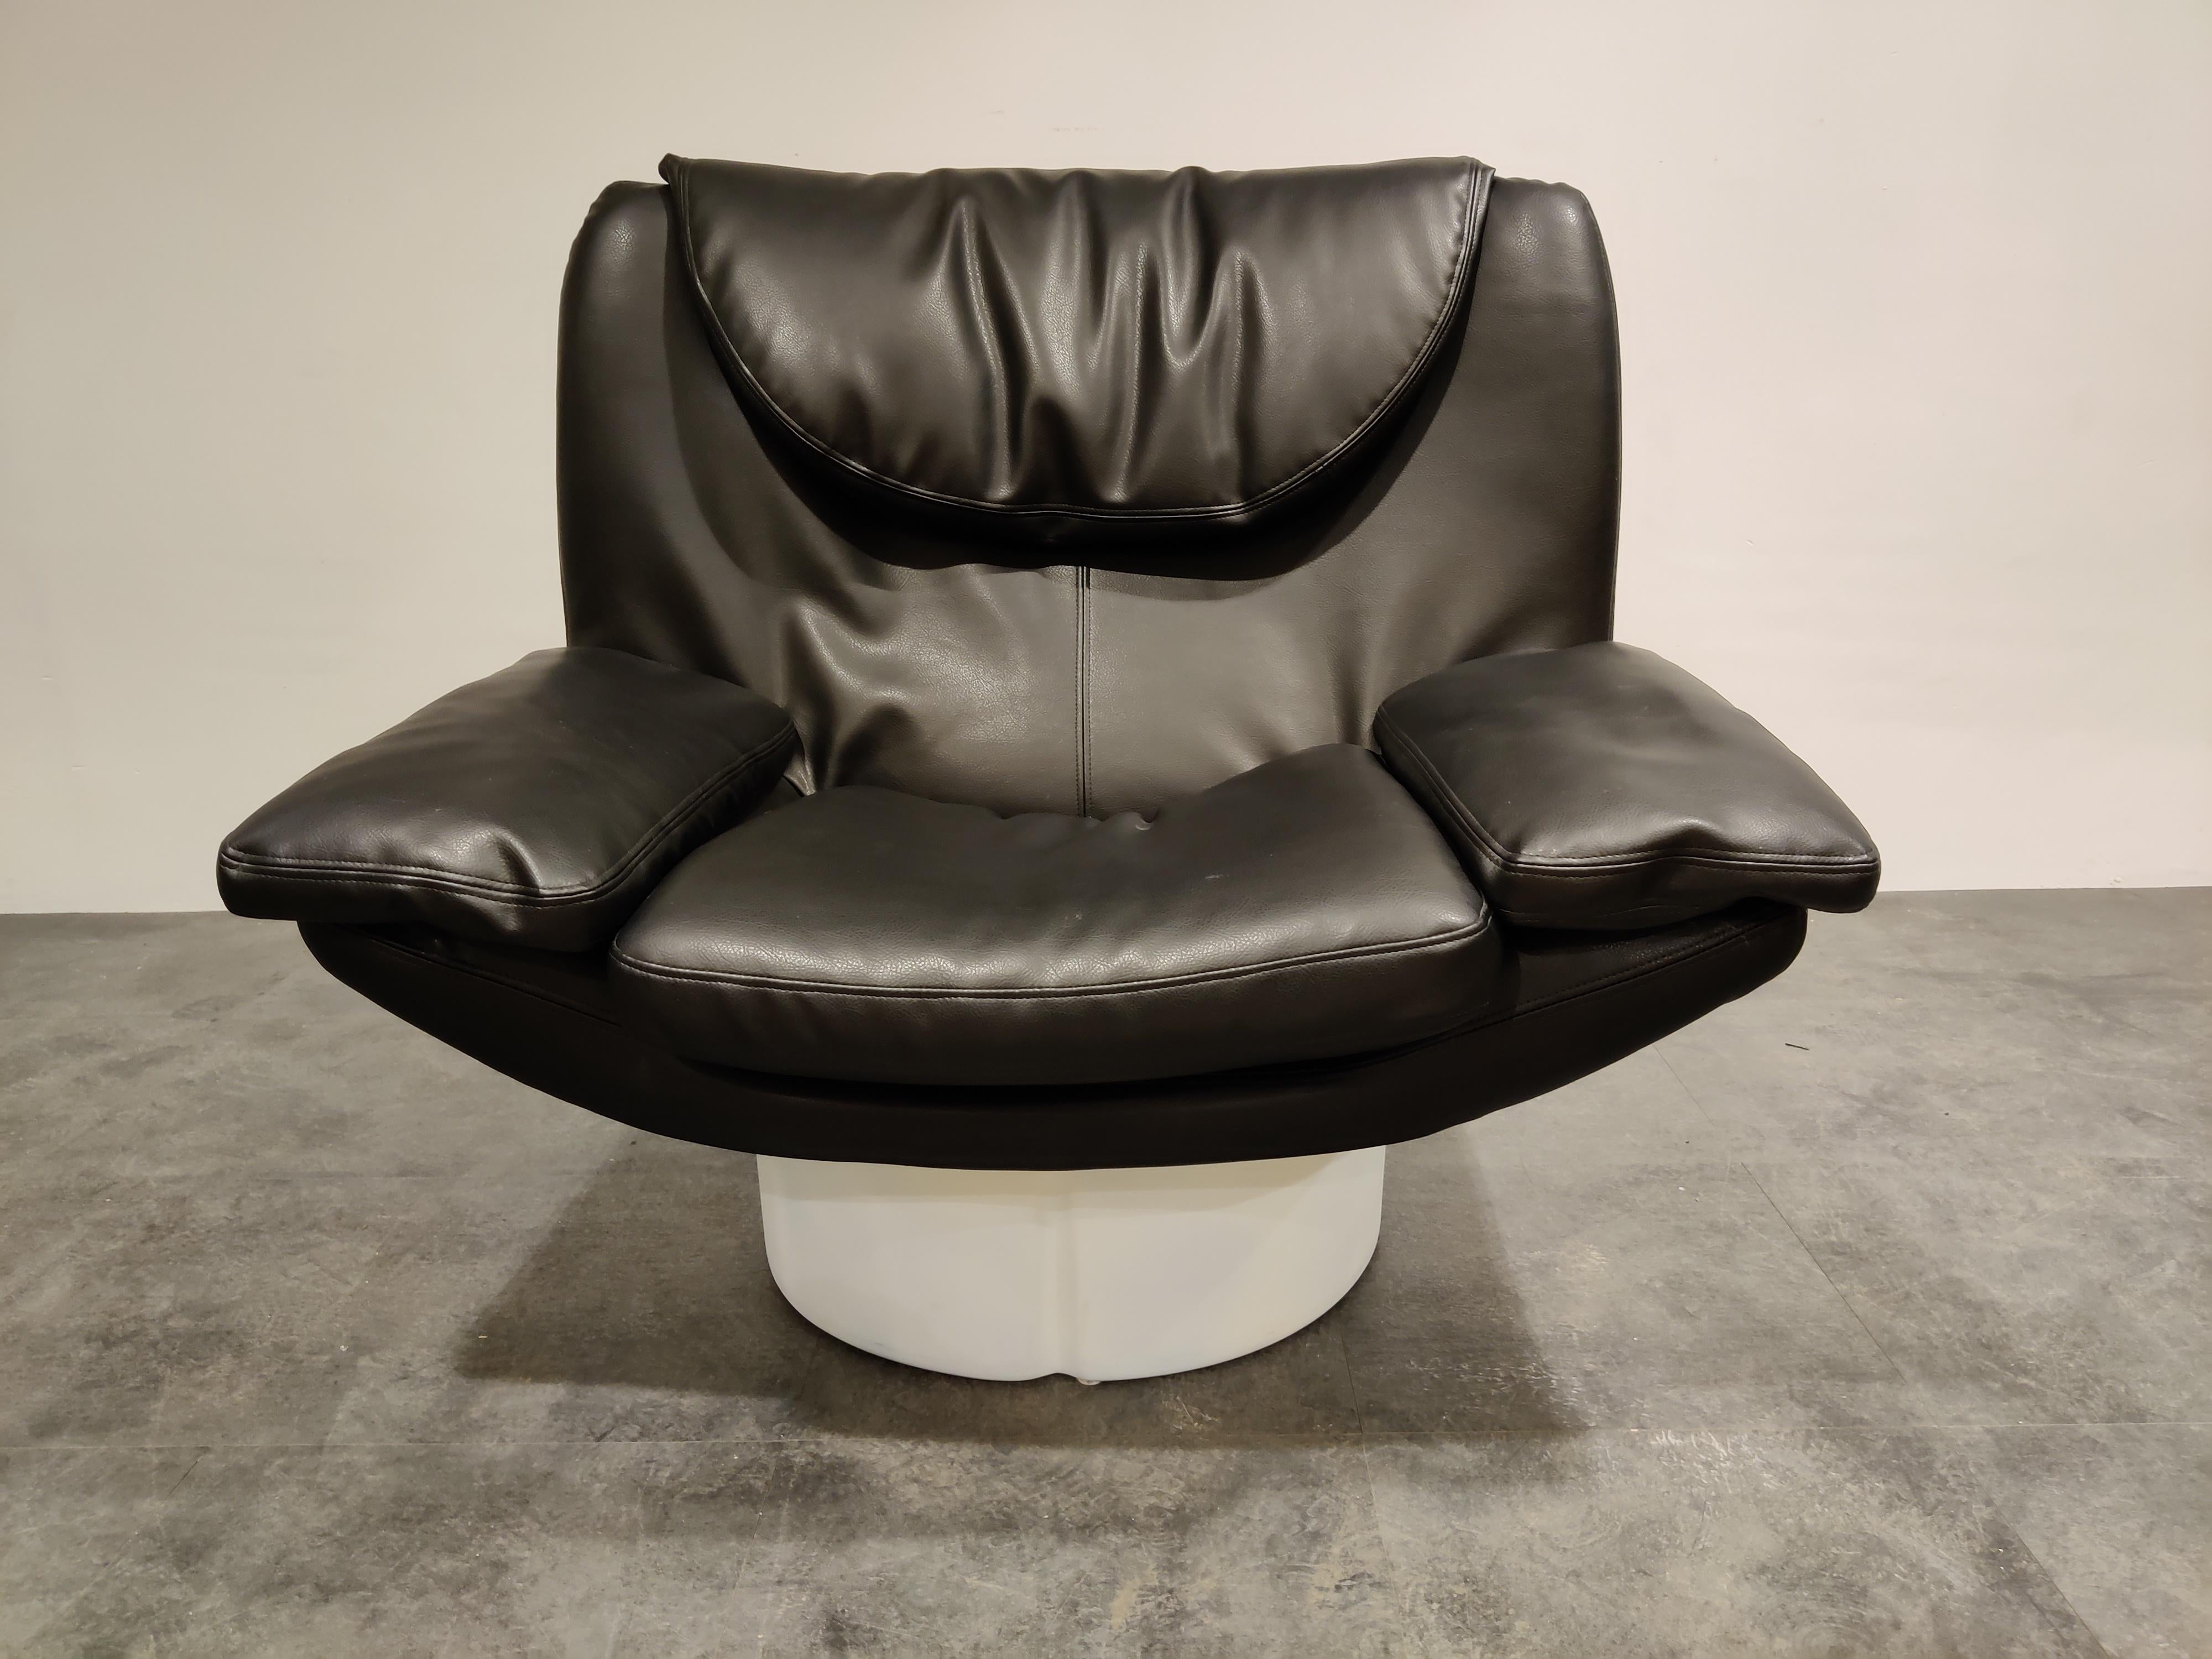 Vintage lounge chair (model Il Potrone) was designed for Comfort in Italy as part of the Il Poltoni 175 series by T. Ammannati and G.P. Vitelli in 1973.

Comes with an as good as new looking original black leather upholstery.

Beautiful Space